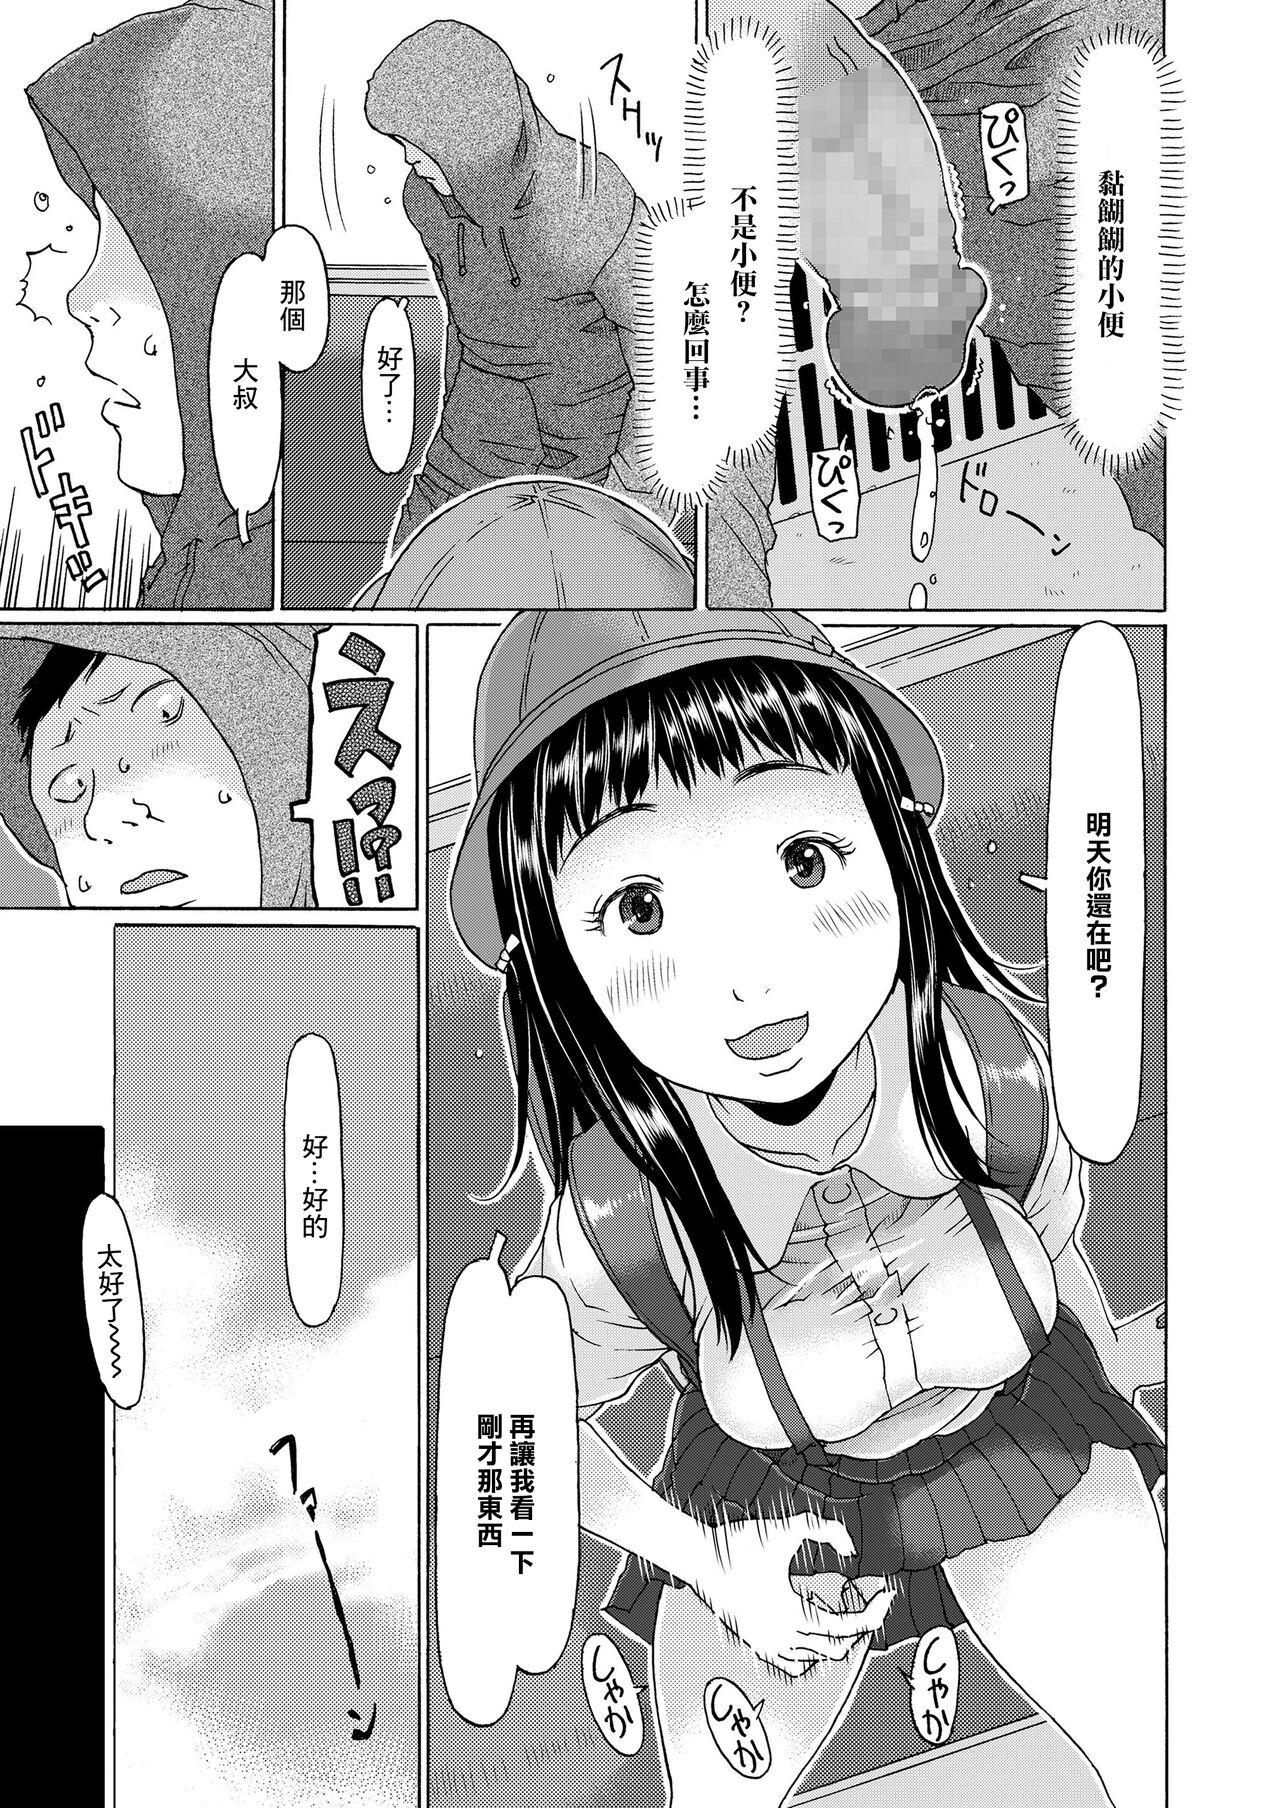 Oral Porn 電車に乗ったら発射です Hymen - Page 5